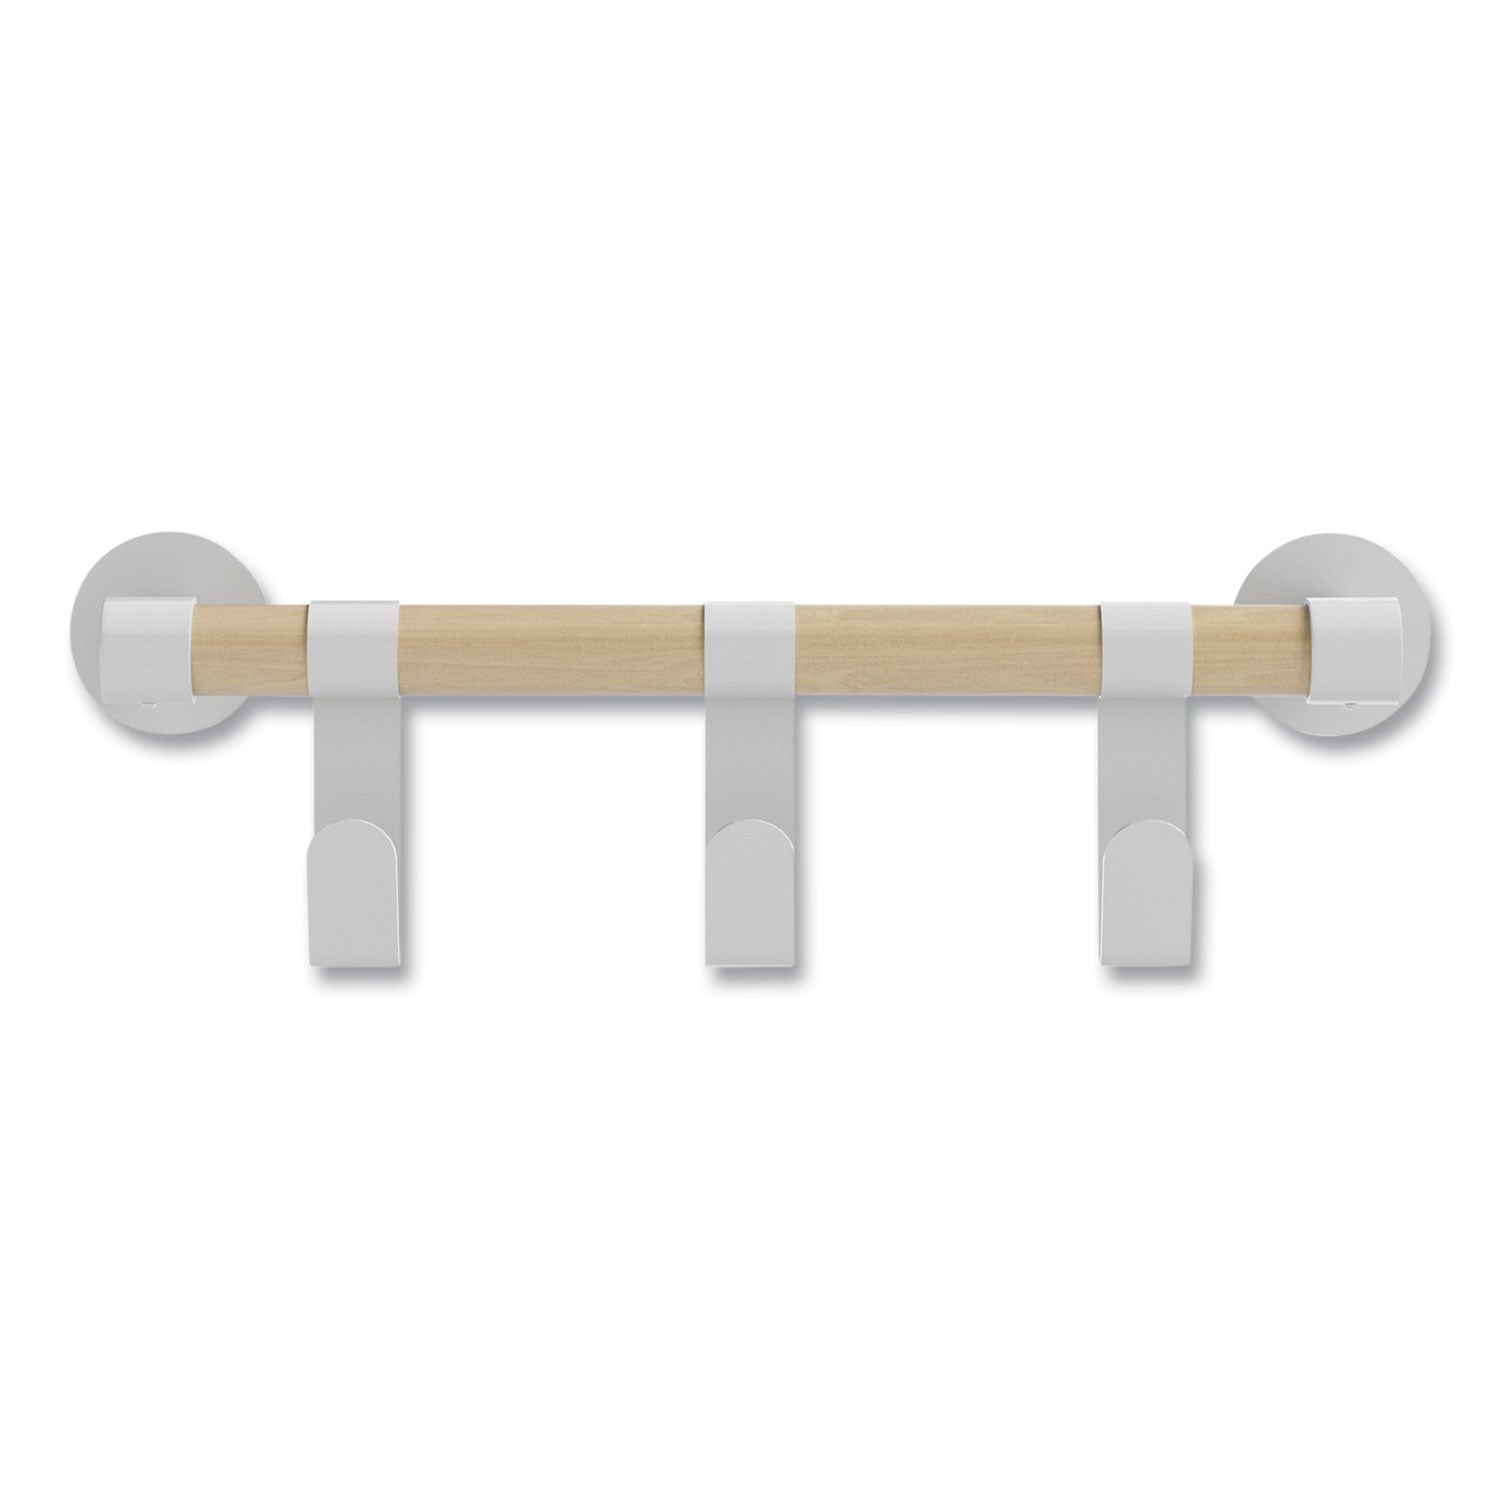 resi-coat-wall-rack-3-hook-1975w-x-425d-x-6h-white-ships-in-1-3-business-days_saf4263wh - 5